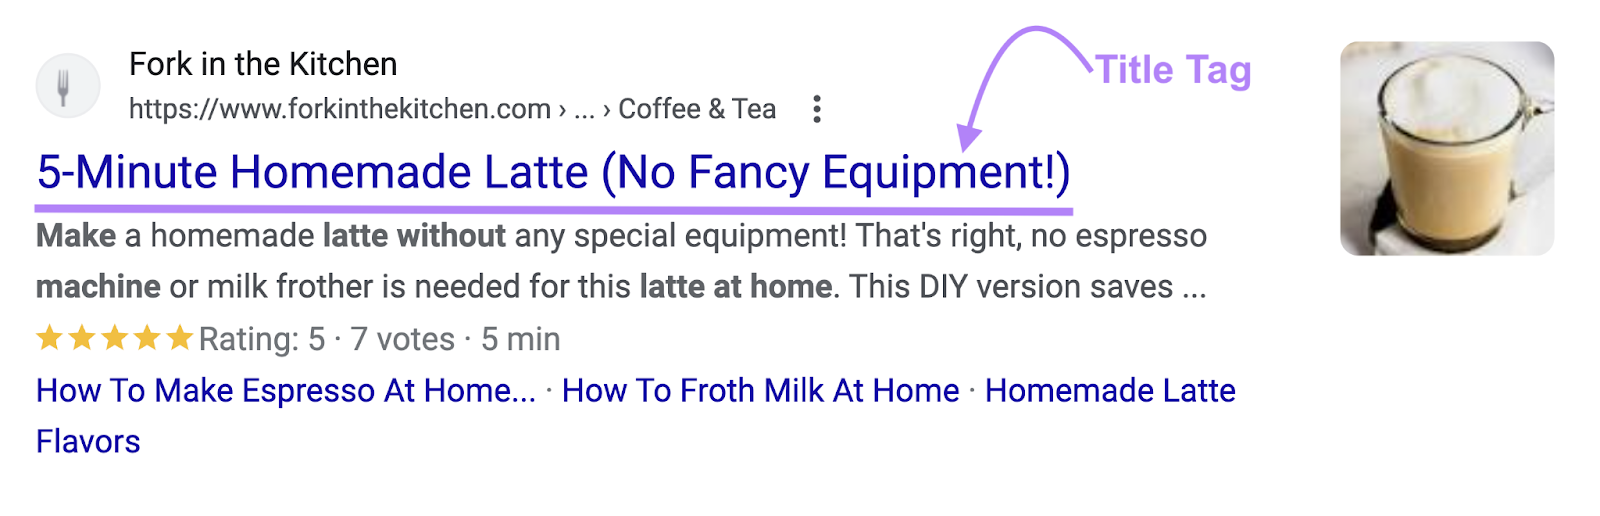 Title tag on the SERP that reads "5-Minute Homemade Latte (No Fancy Equipment)"